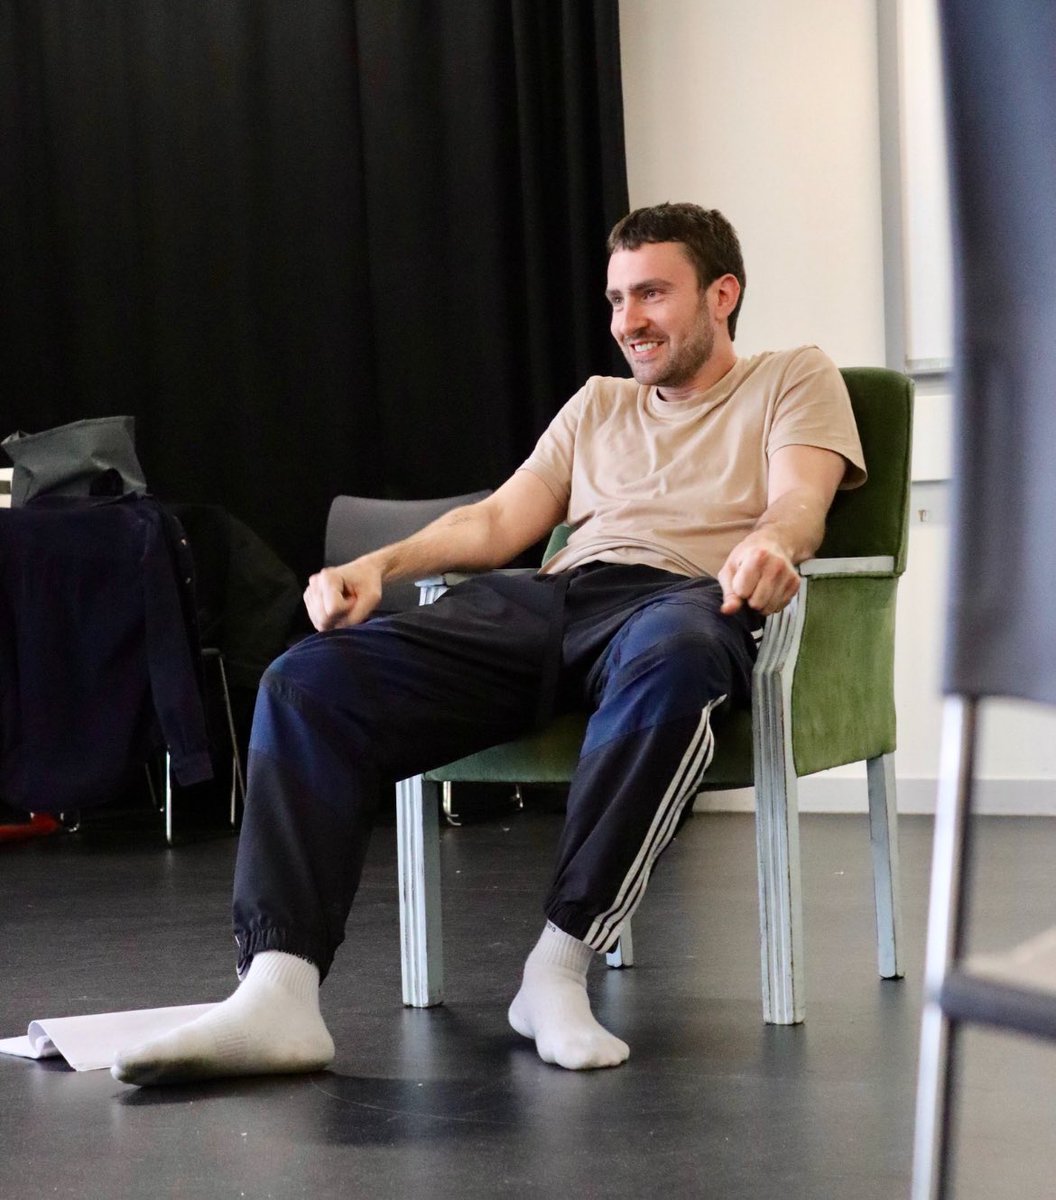 Yesterday I spoke about the boss @gurfeh_ today it’s about the awesome @tomryyder - what an absolute joy it is to work with him - come see his acting masterclass (tickets in bio ) A Number 22/05 -24/05 @53two